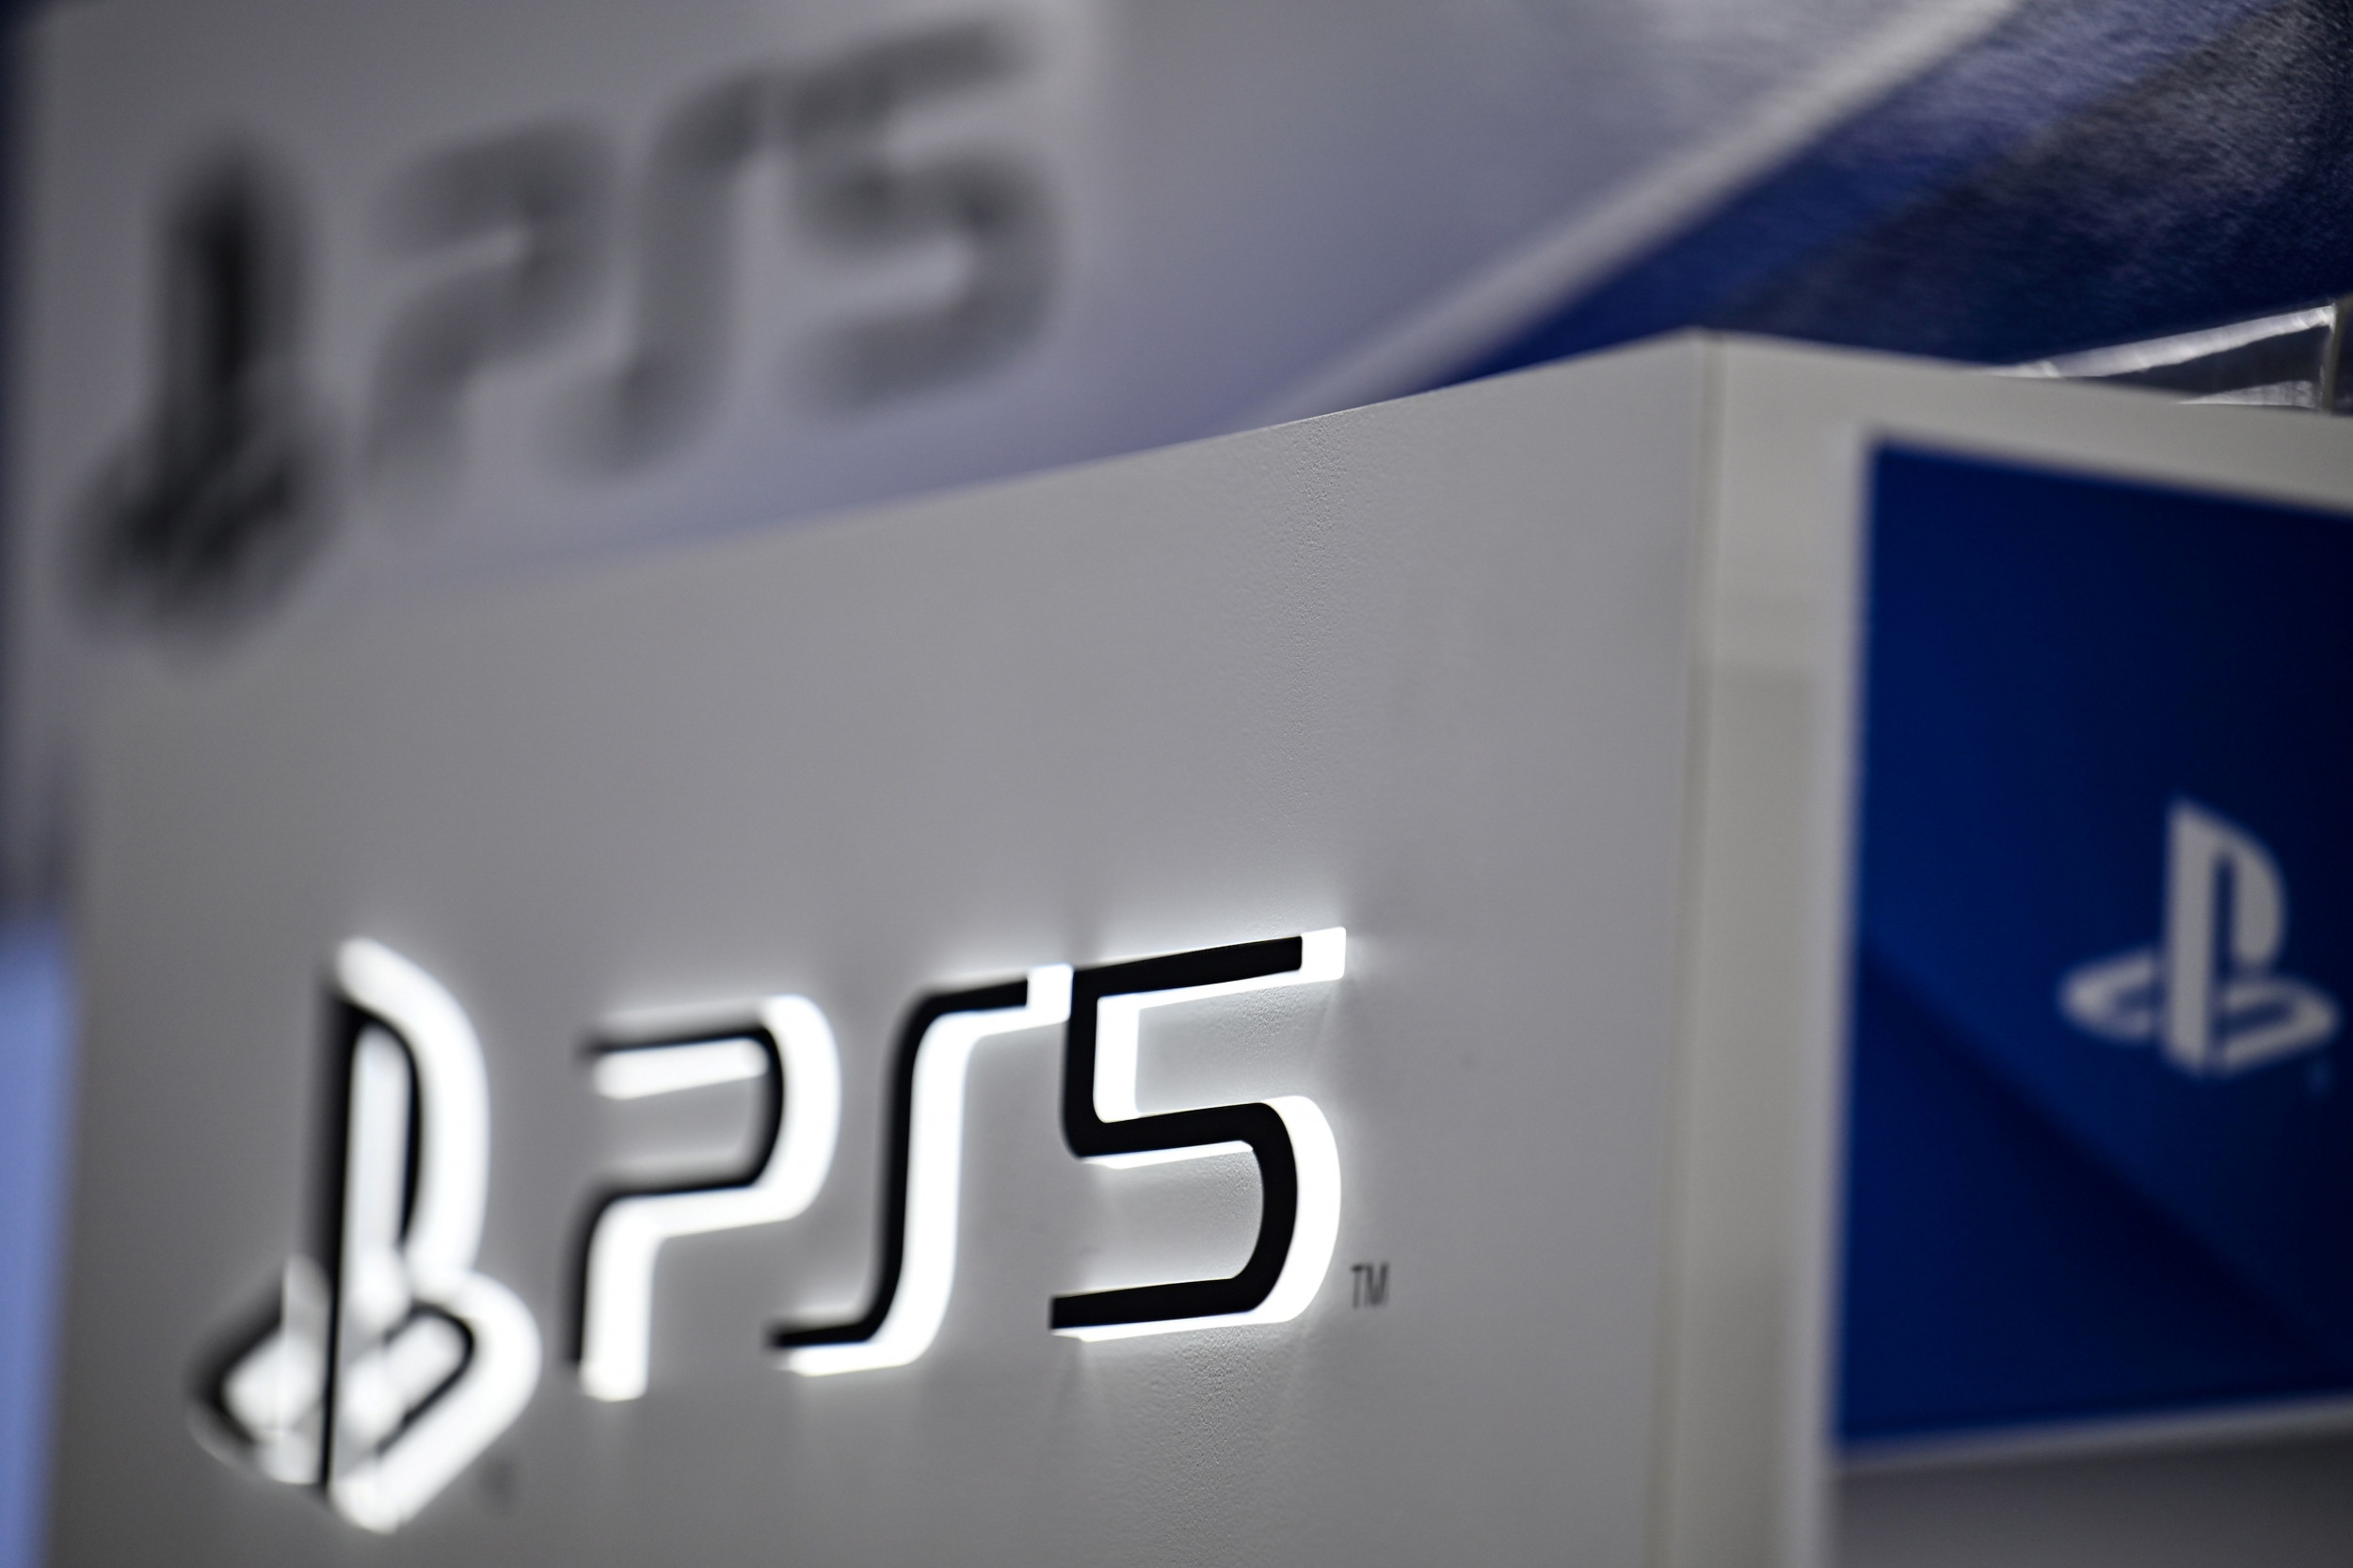 PS5 stock updates for Target, Amazon, Best Buy, GameStop, Newegg and more